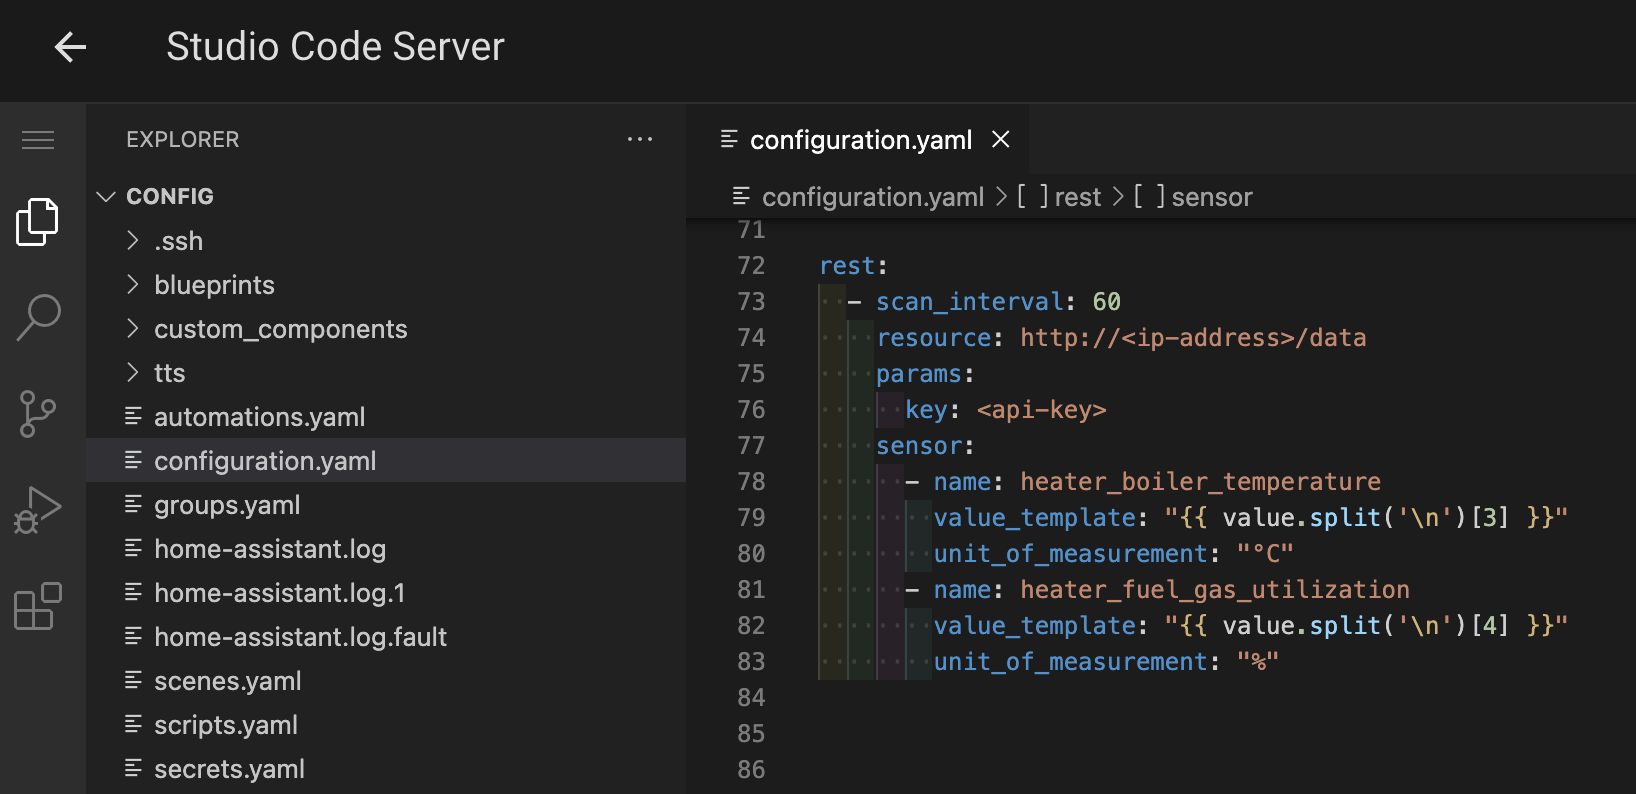 Editing the configuration.yaml file using the integrated Visual Studio Code Server